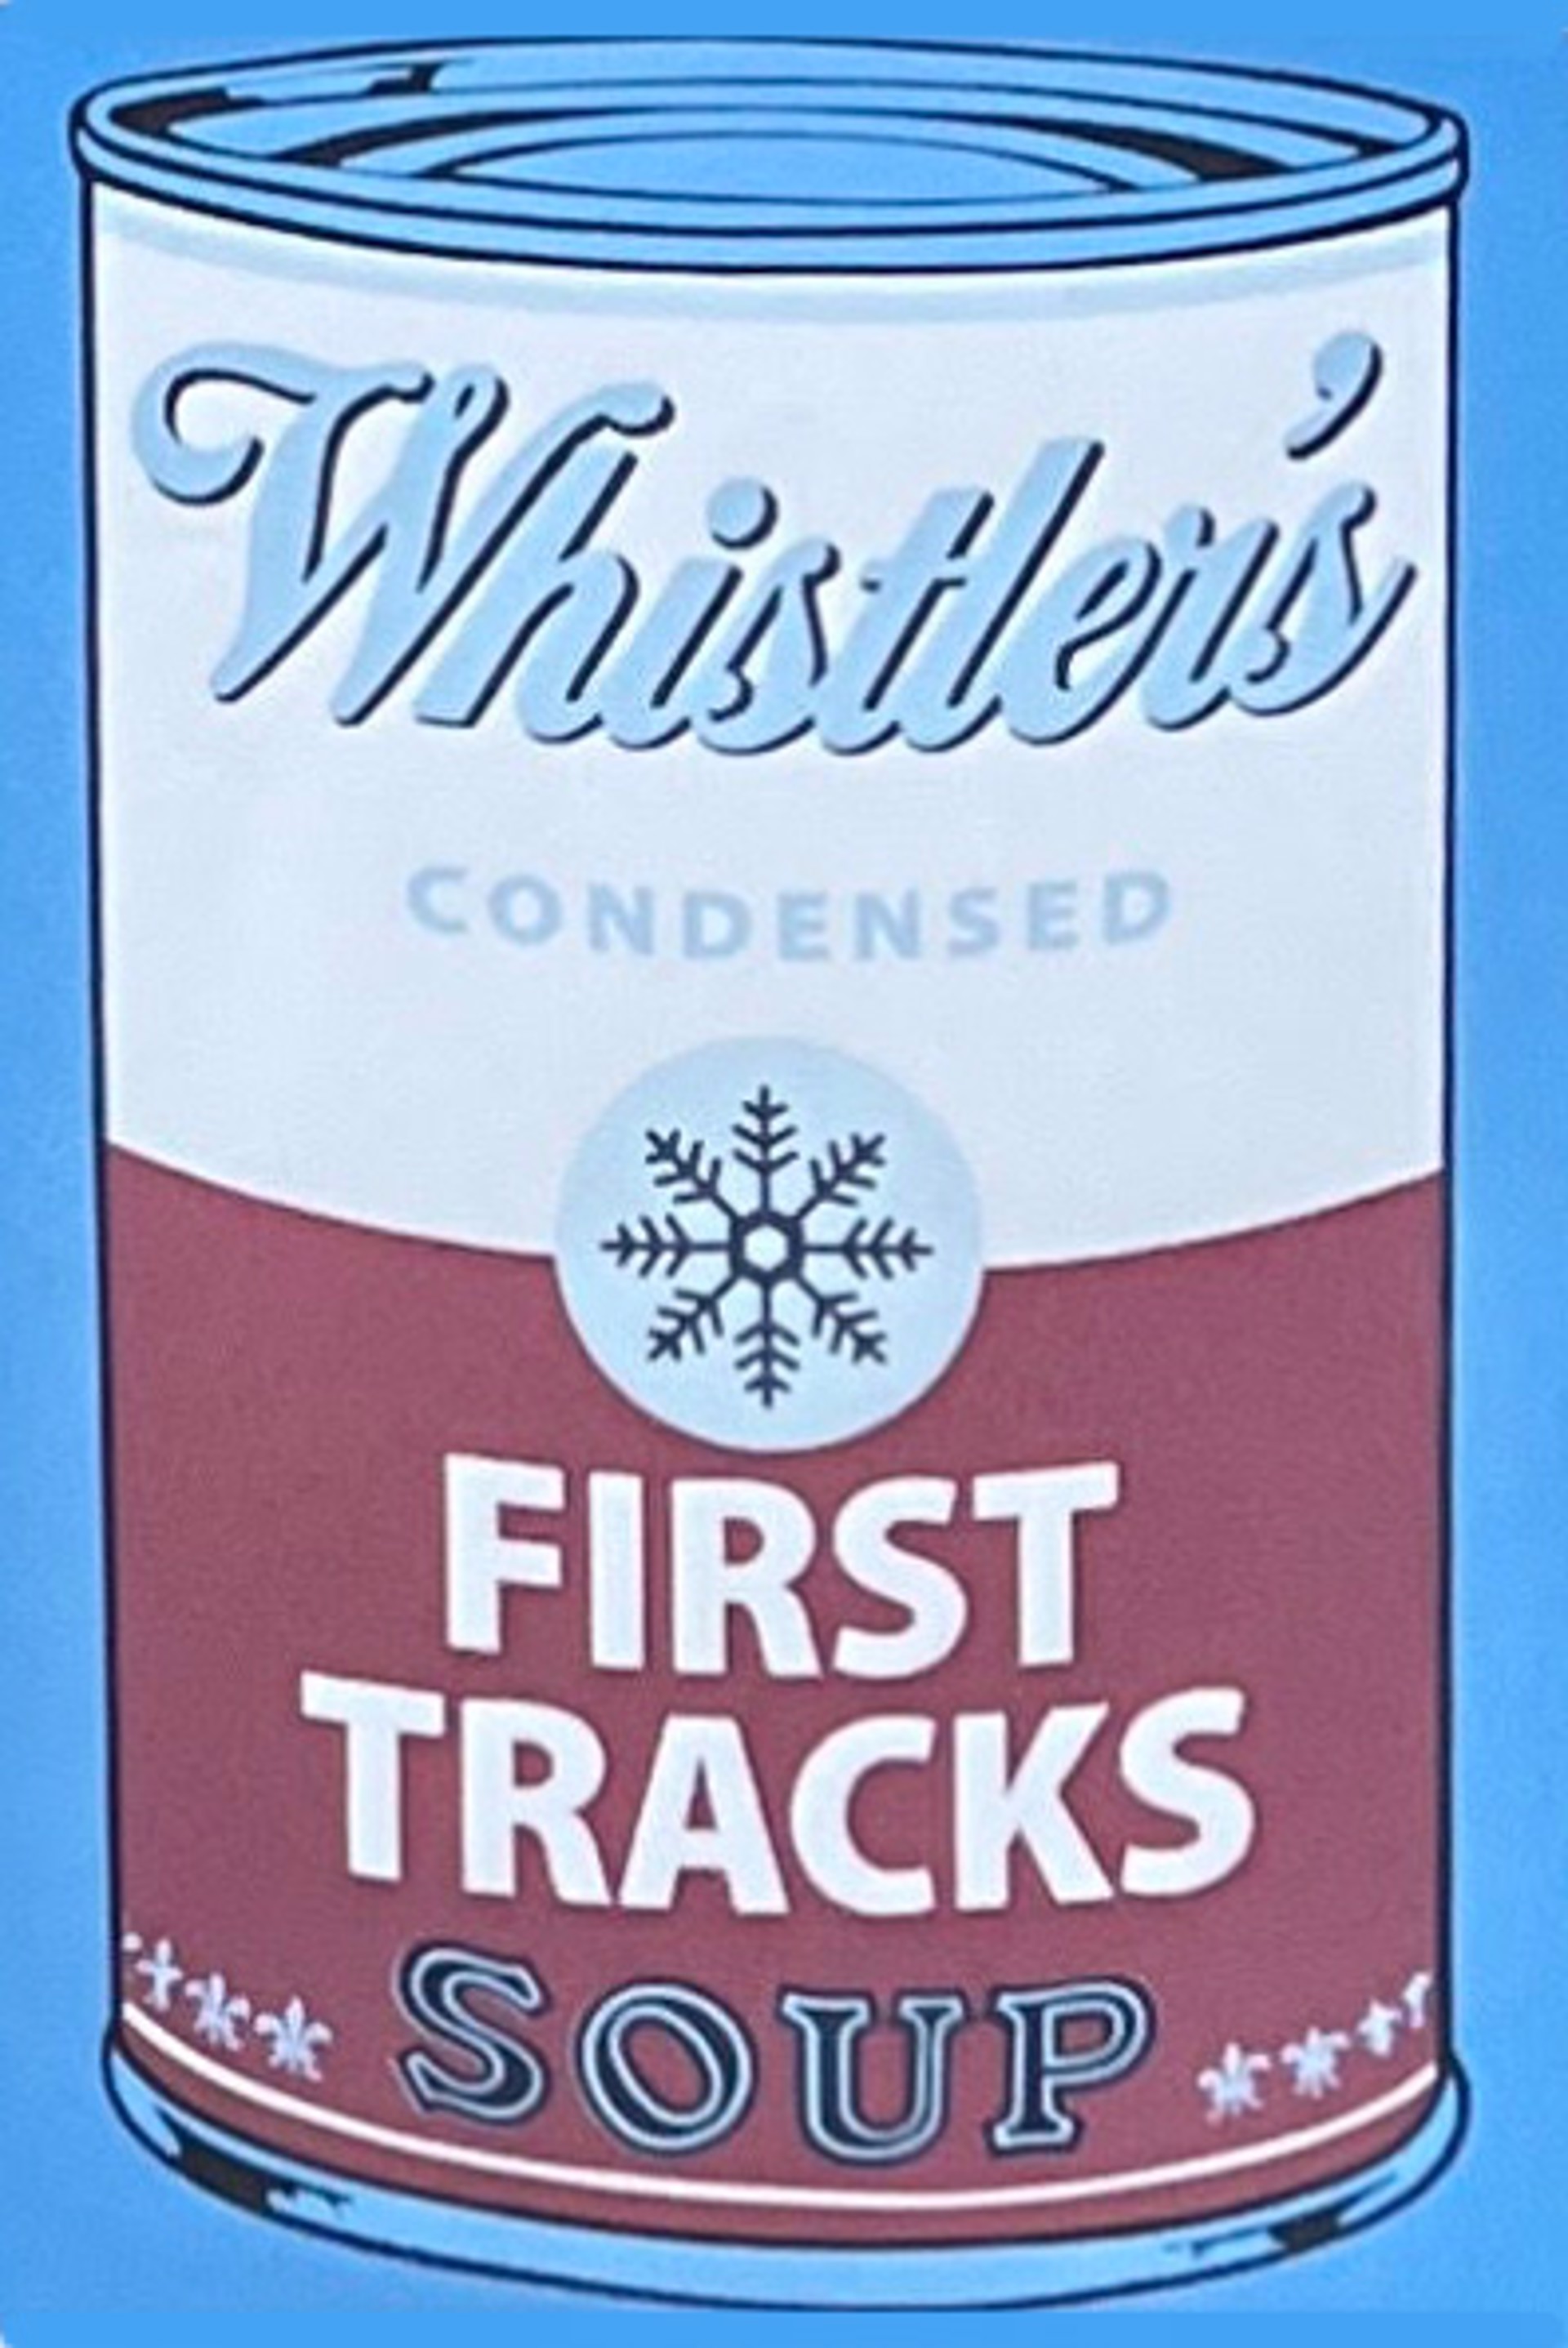 First Tracks Red/White/Blue by Jason Dussault